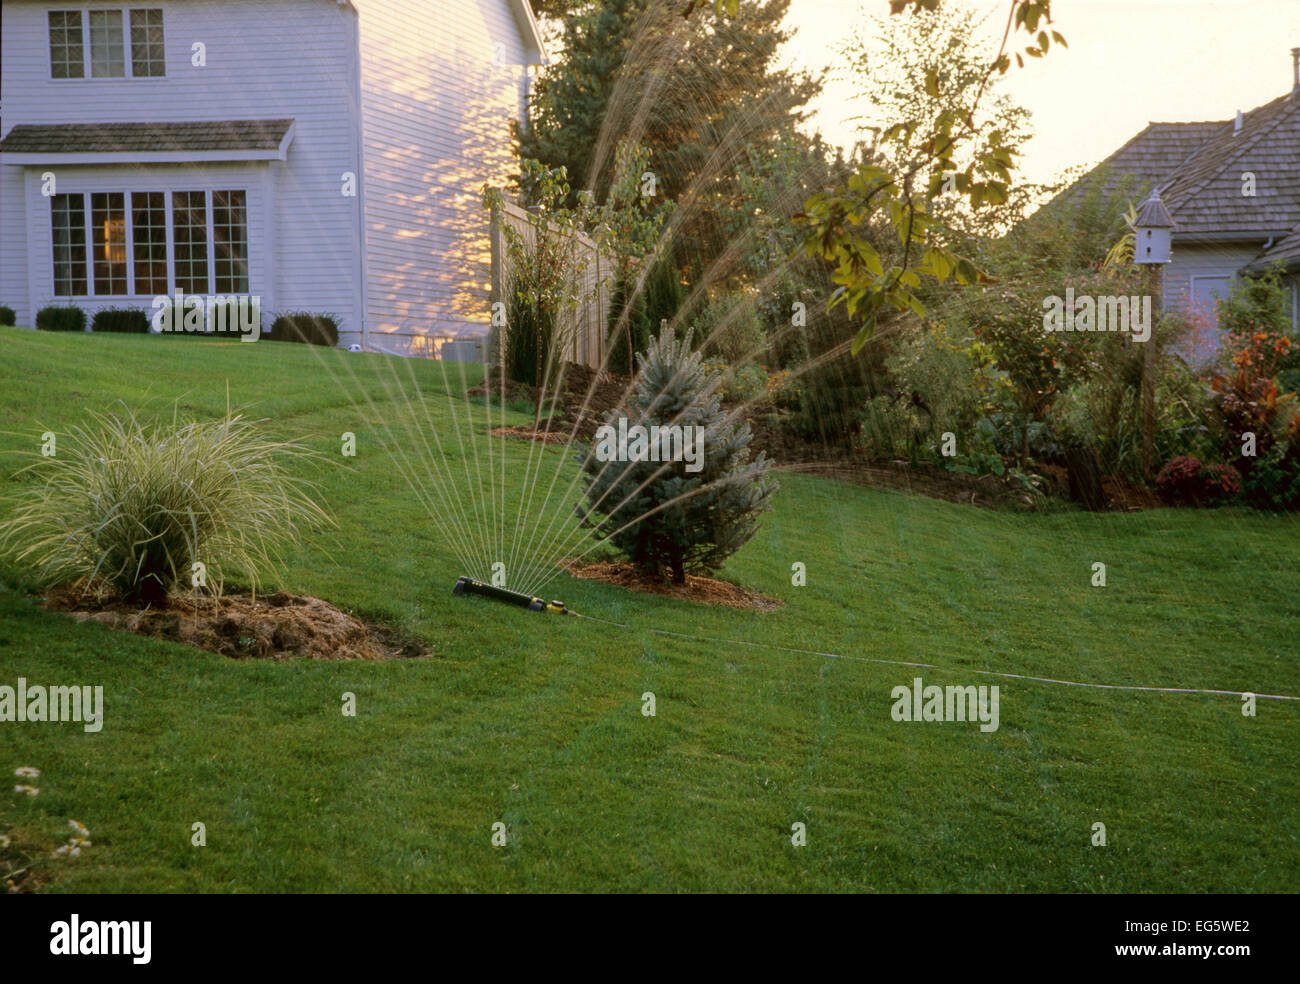 Watering lawn with sprinkler Stock Photo